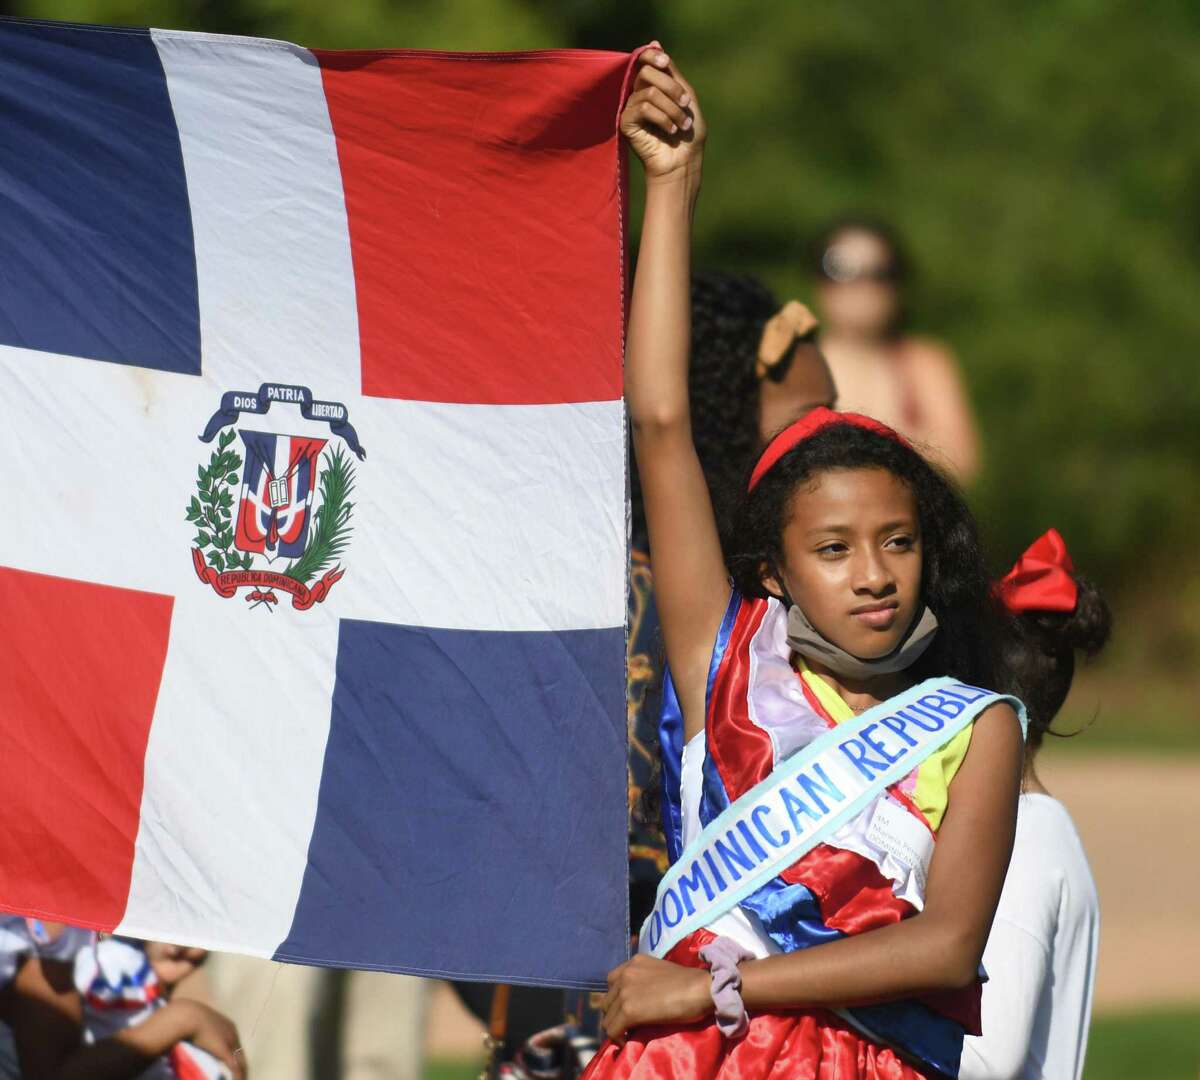 Fourth-grader Mariela Perez Rosario holds the Dominican flag during the United Nations Day Celebration "Parade of Nations" at Julian Curtiss School in Greenwich, Conn. Thursday, Oct. 21, 2021. Students representing 60 countries and speaking 30 different languages marched in the parade, waving flags and wearing clothing to represent their country's heritage.